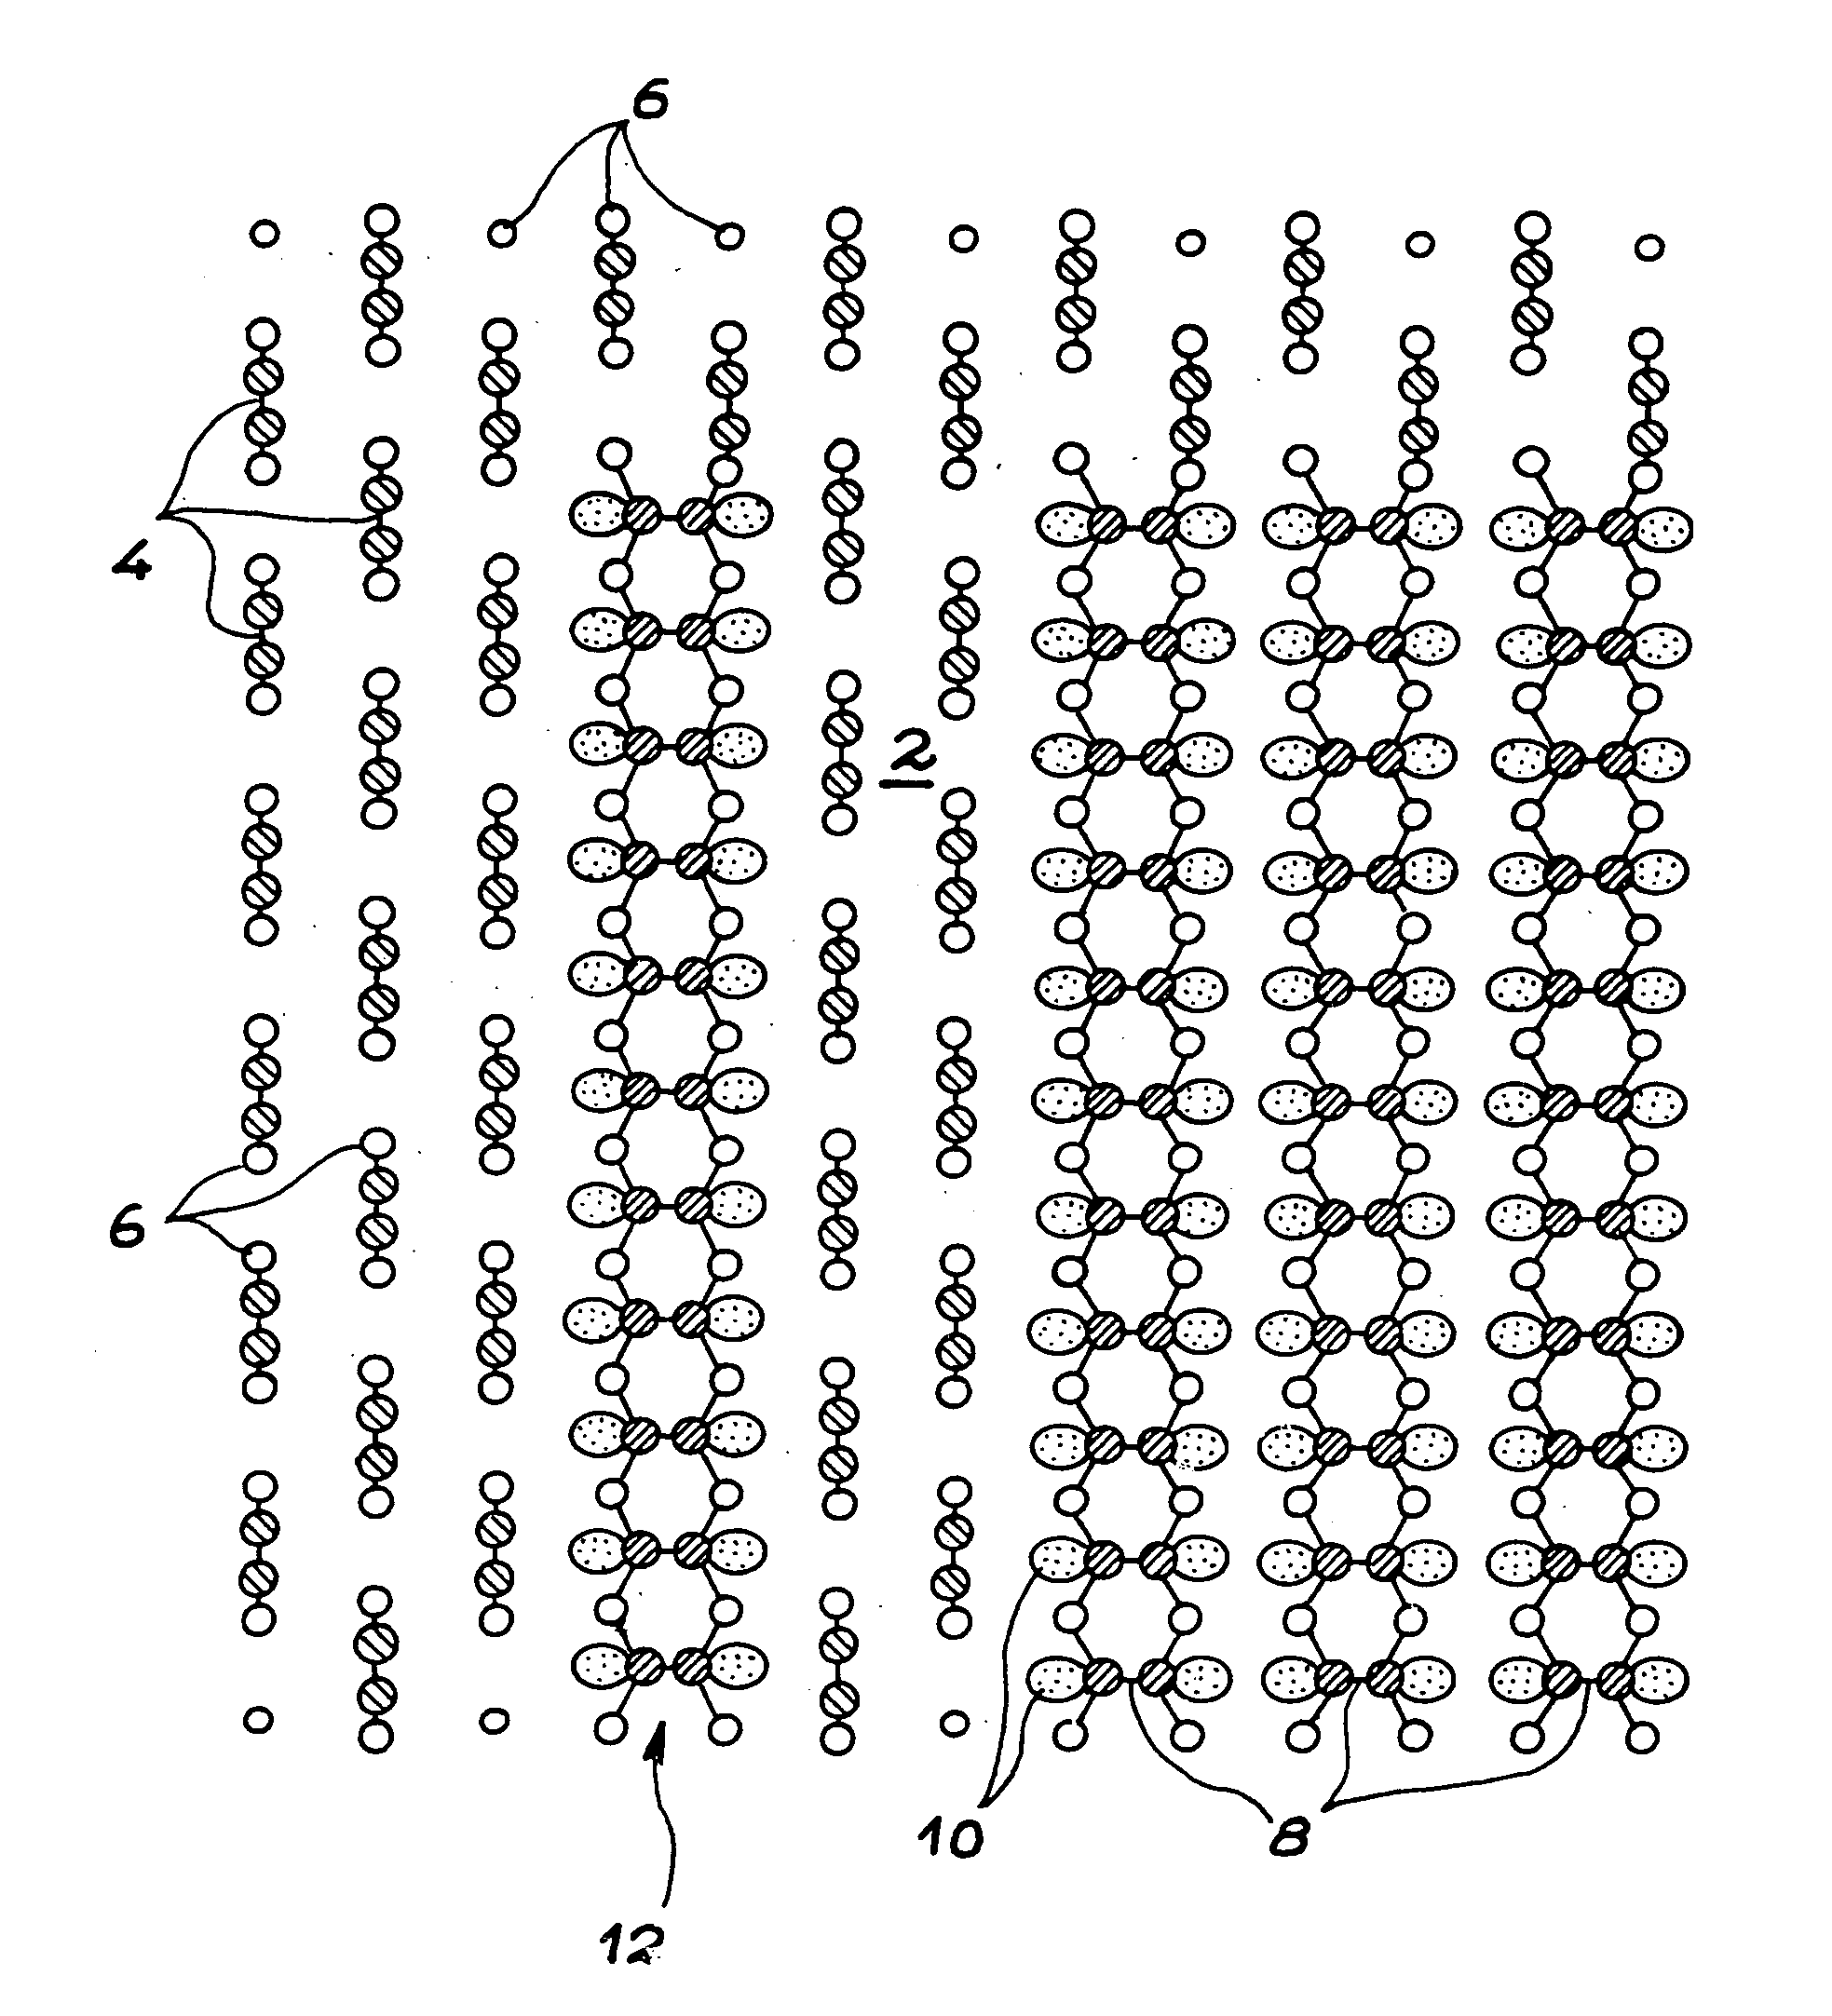 Monoatomic and moncrystalline layer of large size, in diamond type carbon, and method for the manufacture of this layer